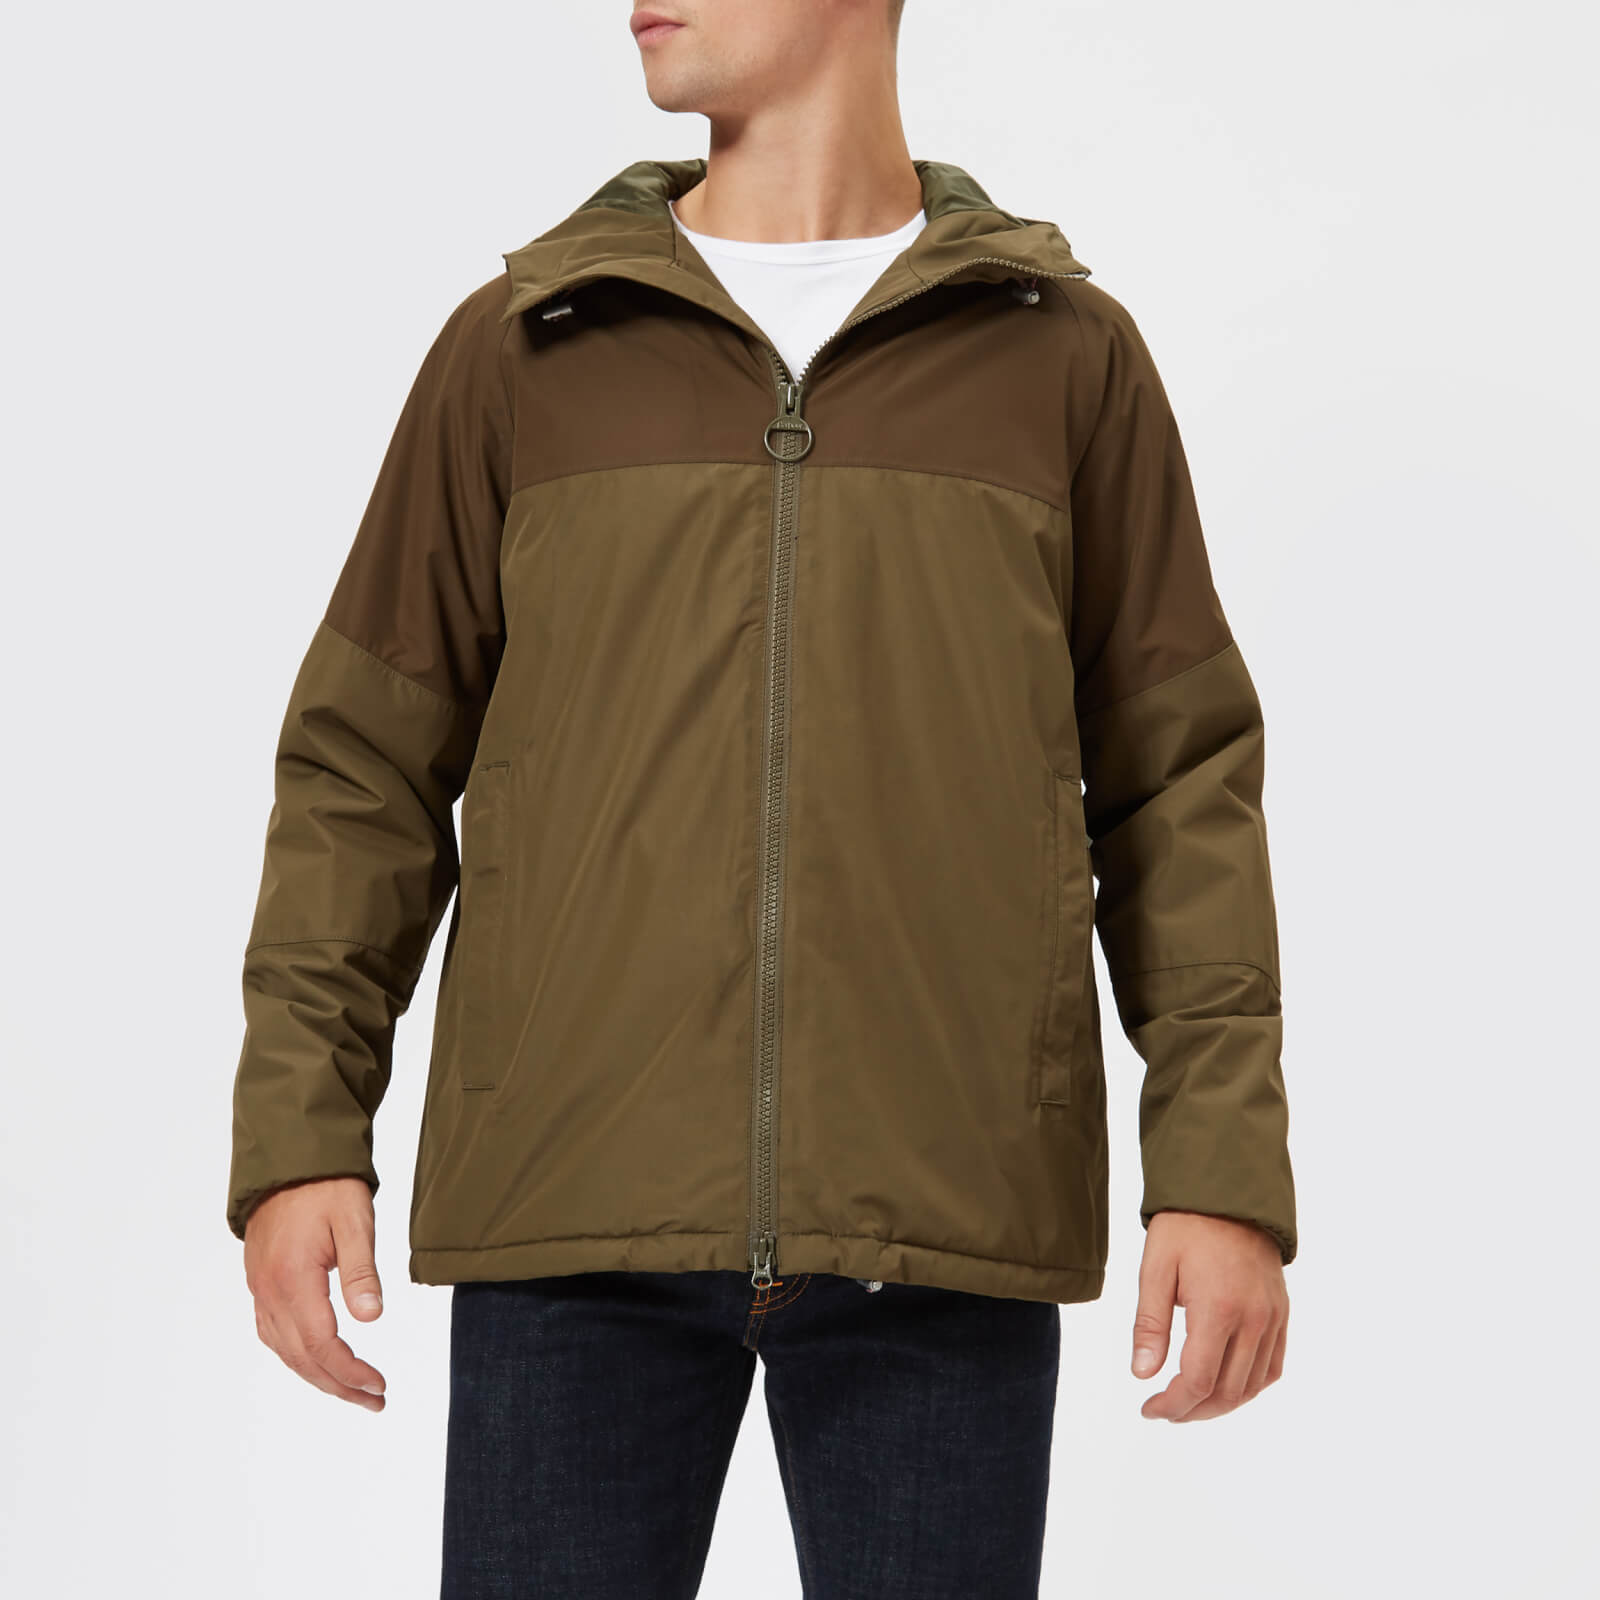 Beacon Troutbeck Jacket - Army Green 